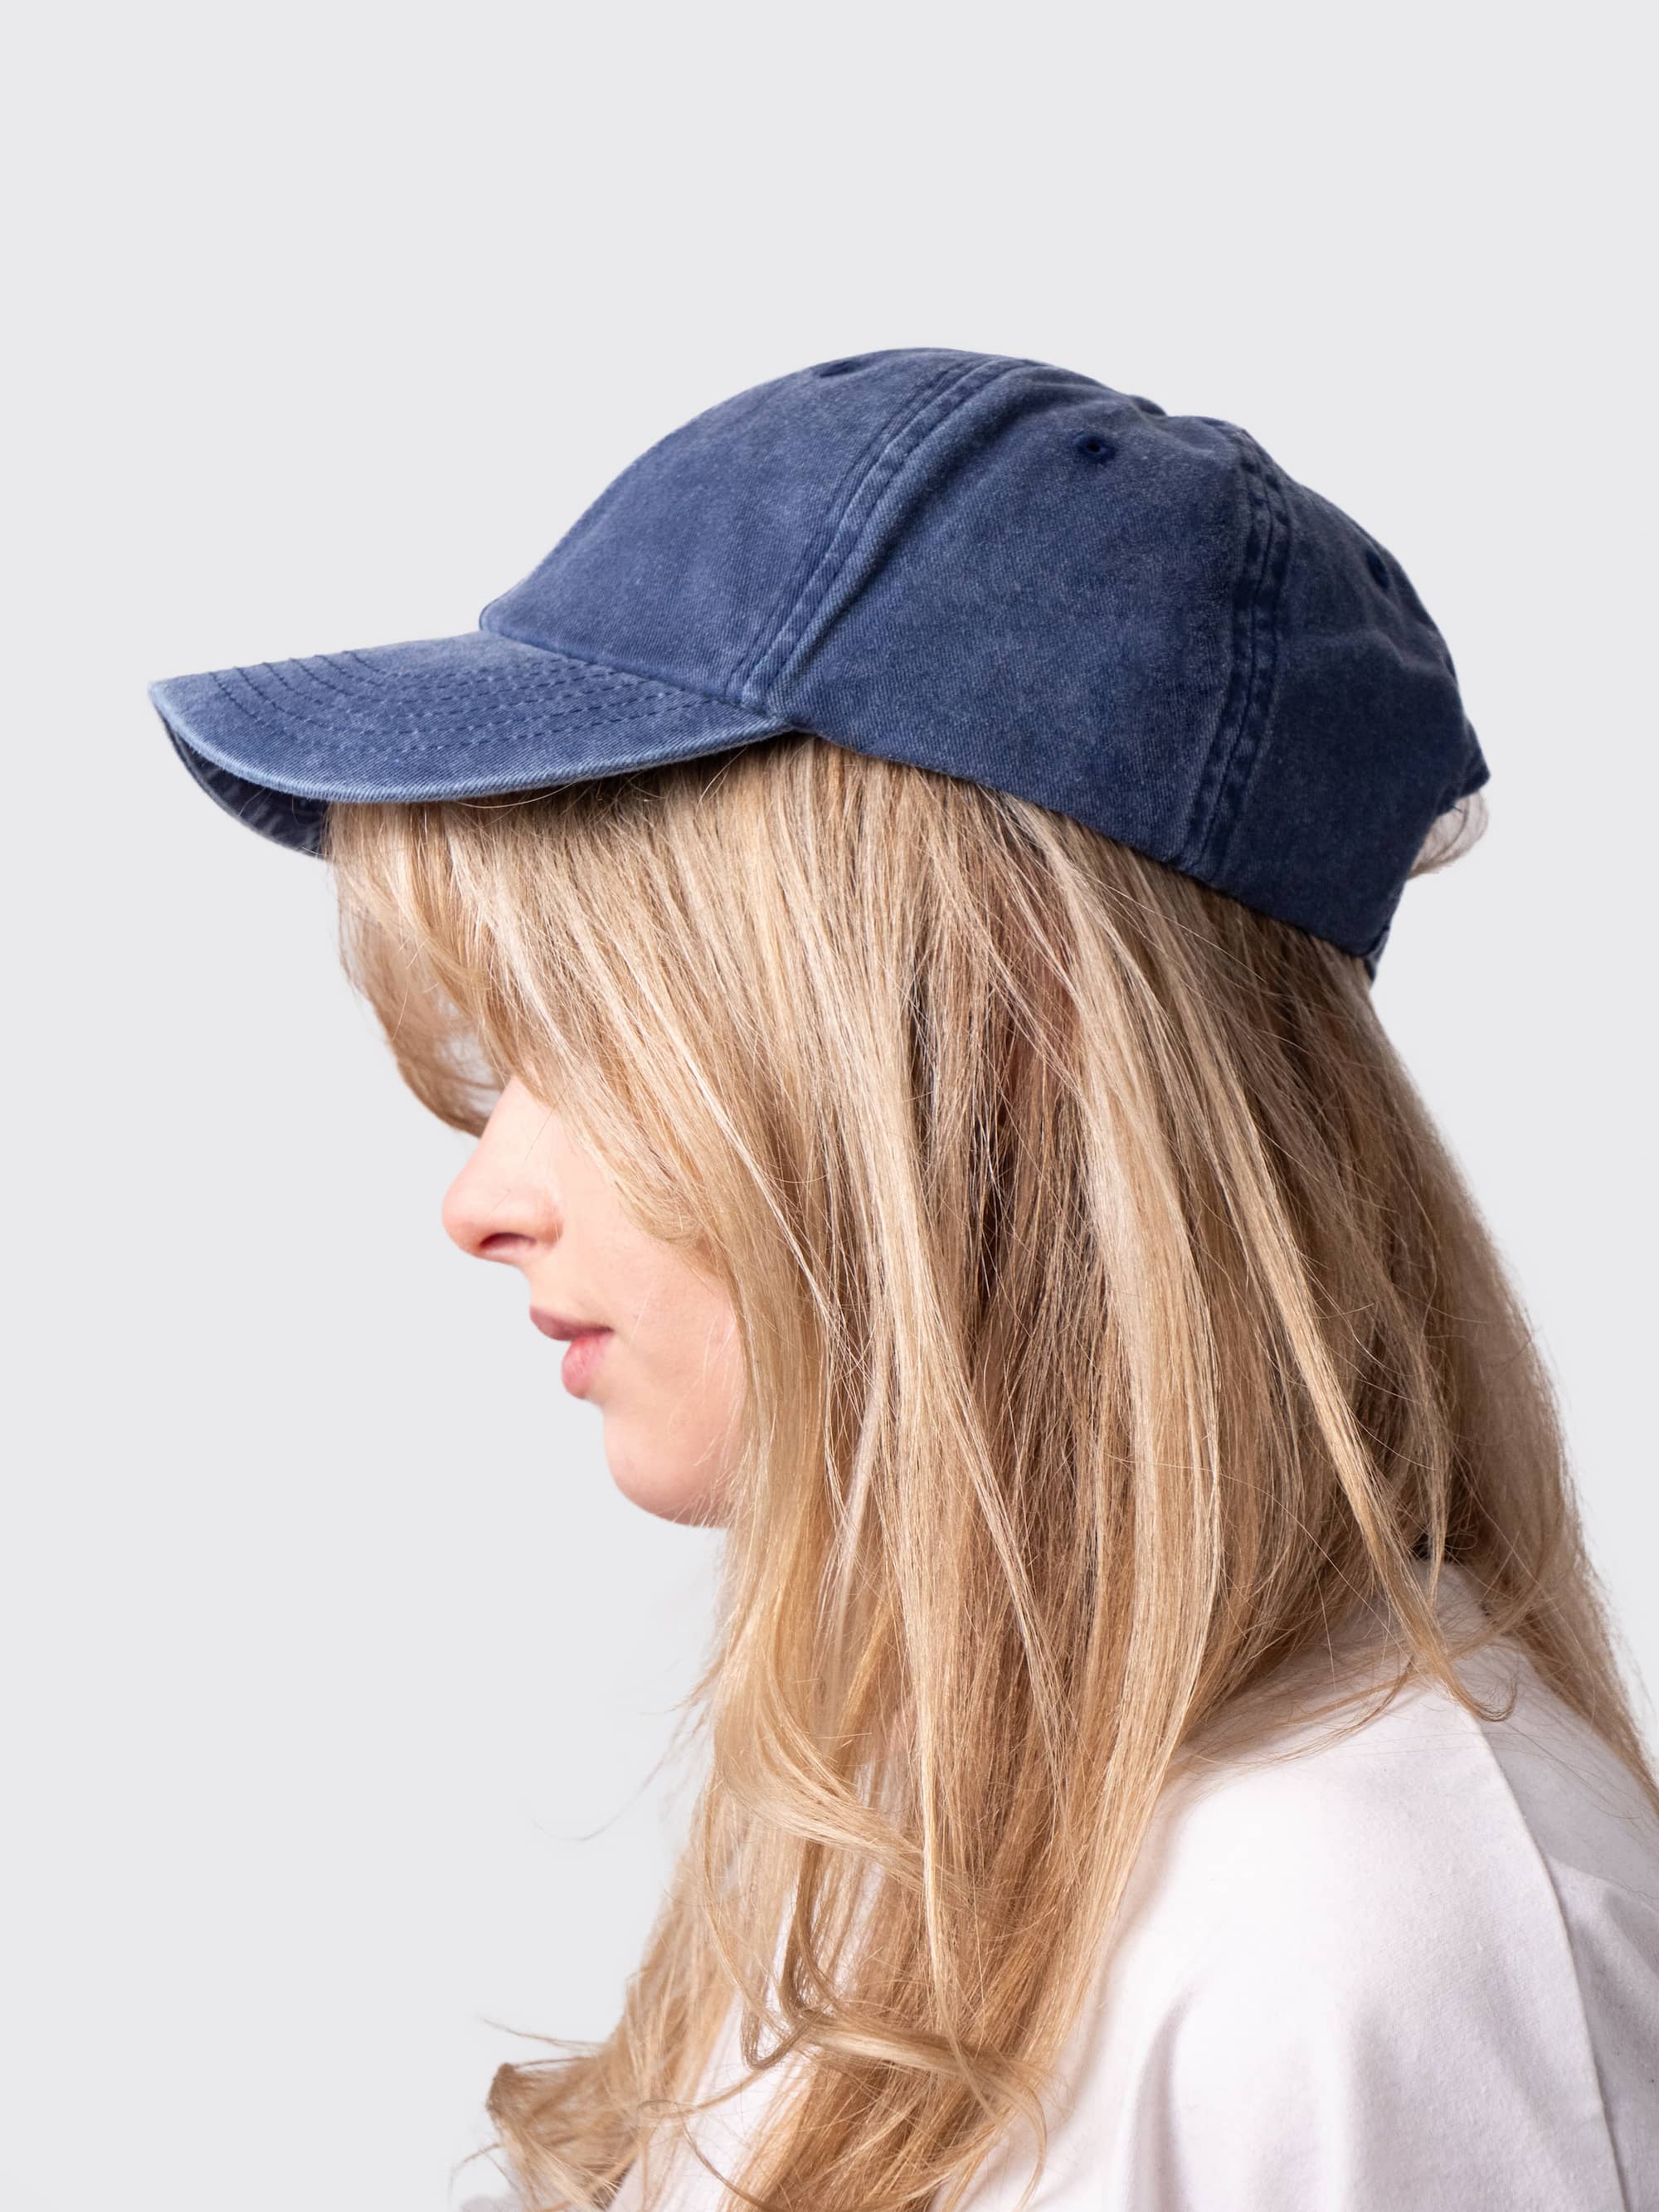 Denim vintage cap, with embroidered Clare crest